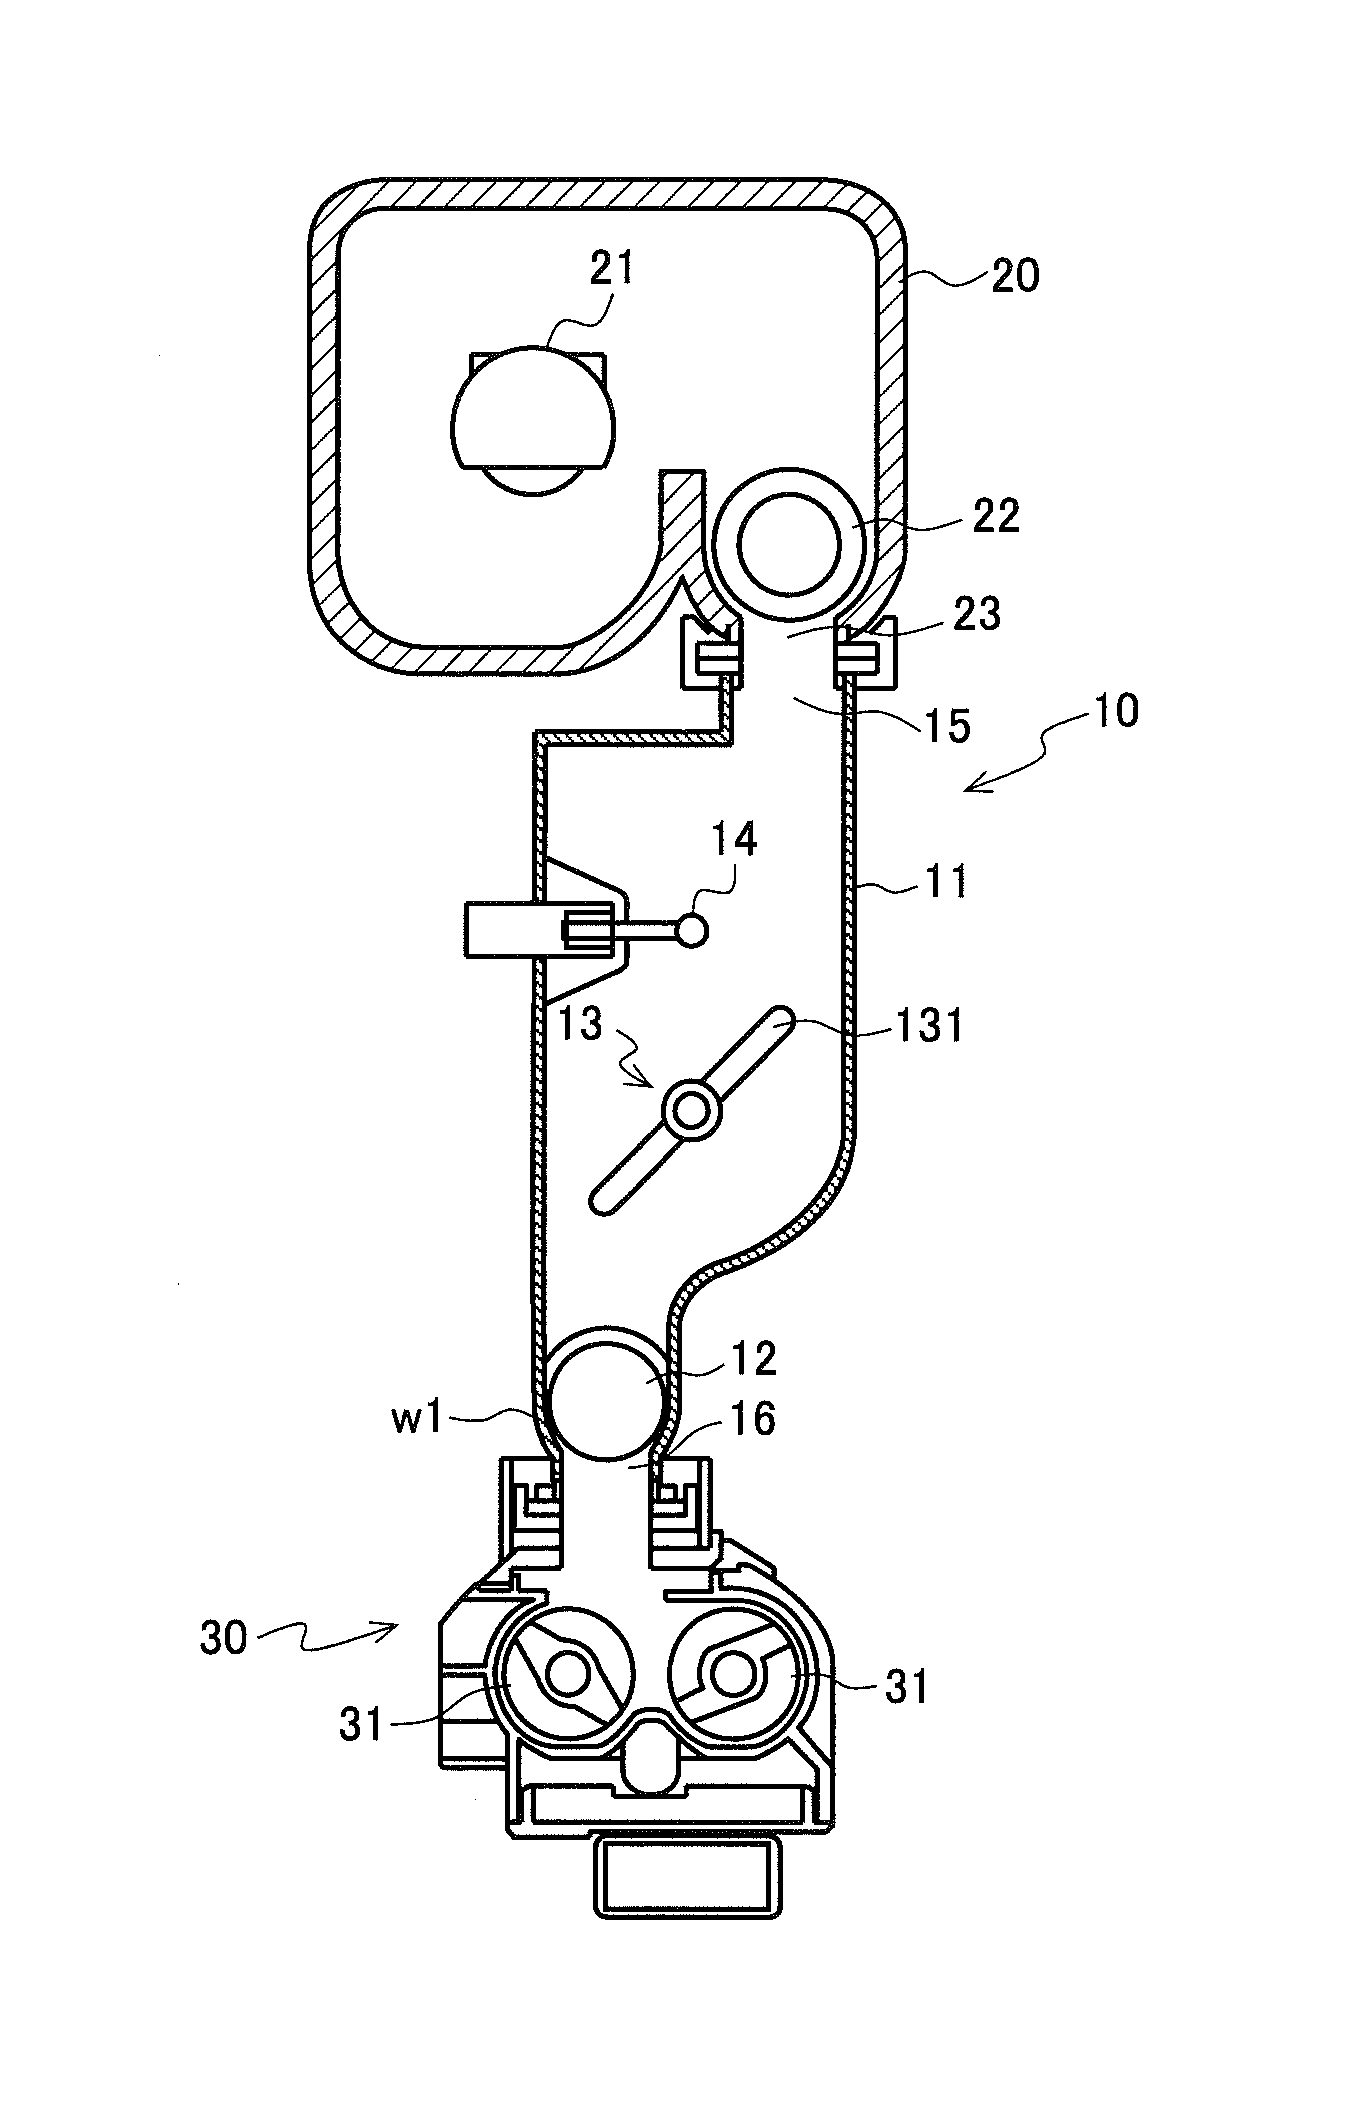 Toner supplying device and image forming apparatus